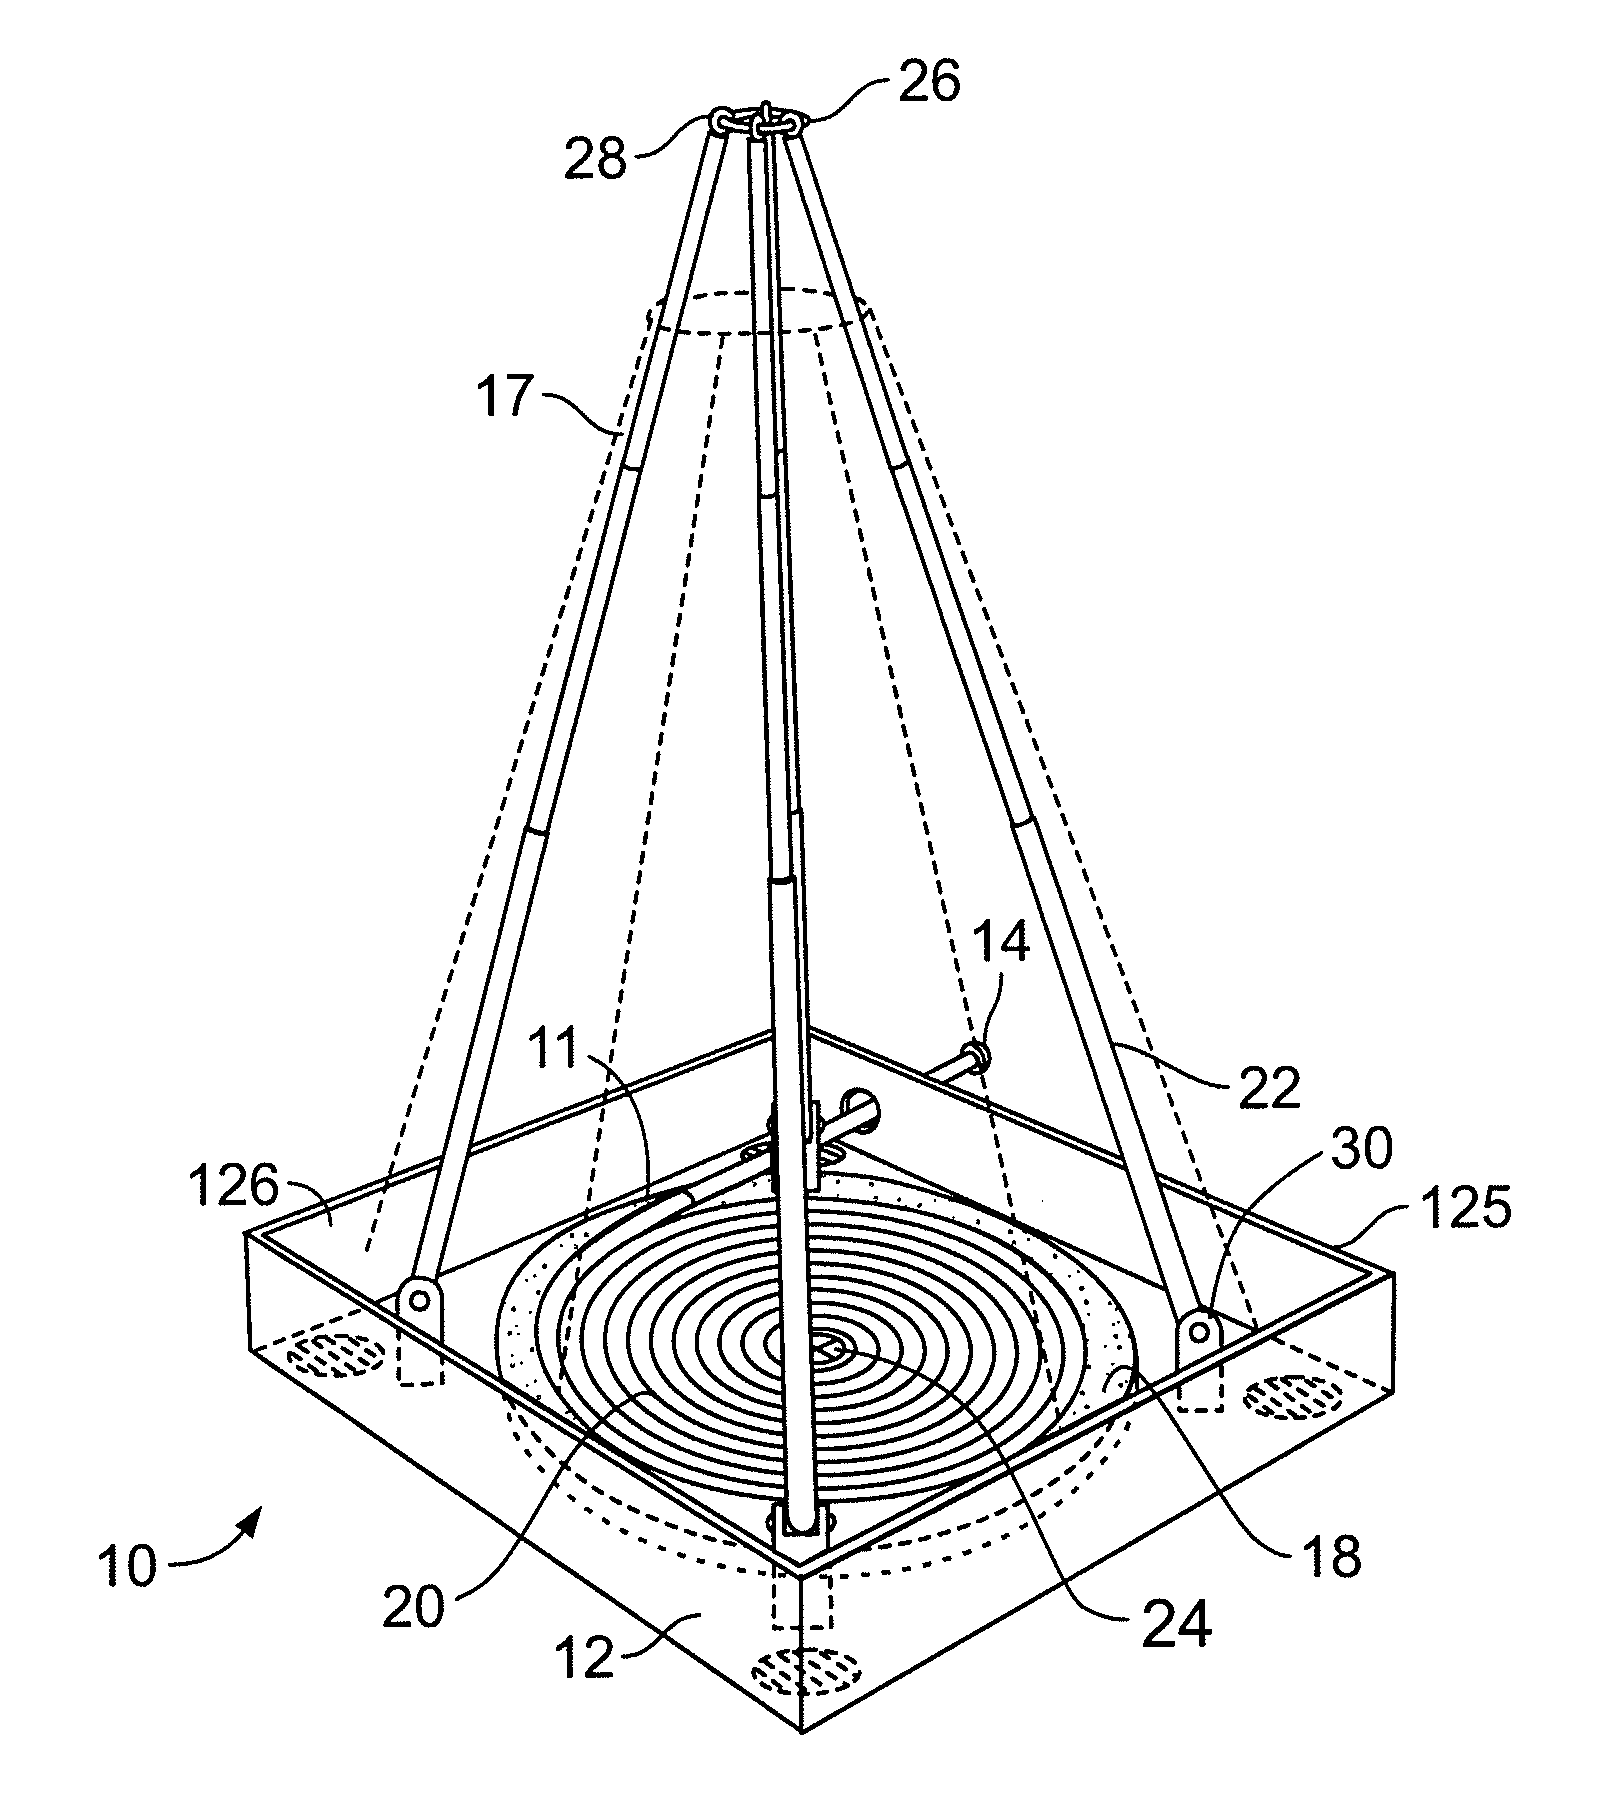 Retractable Parking and Safety Cone and Method of Use